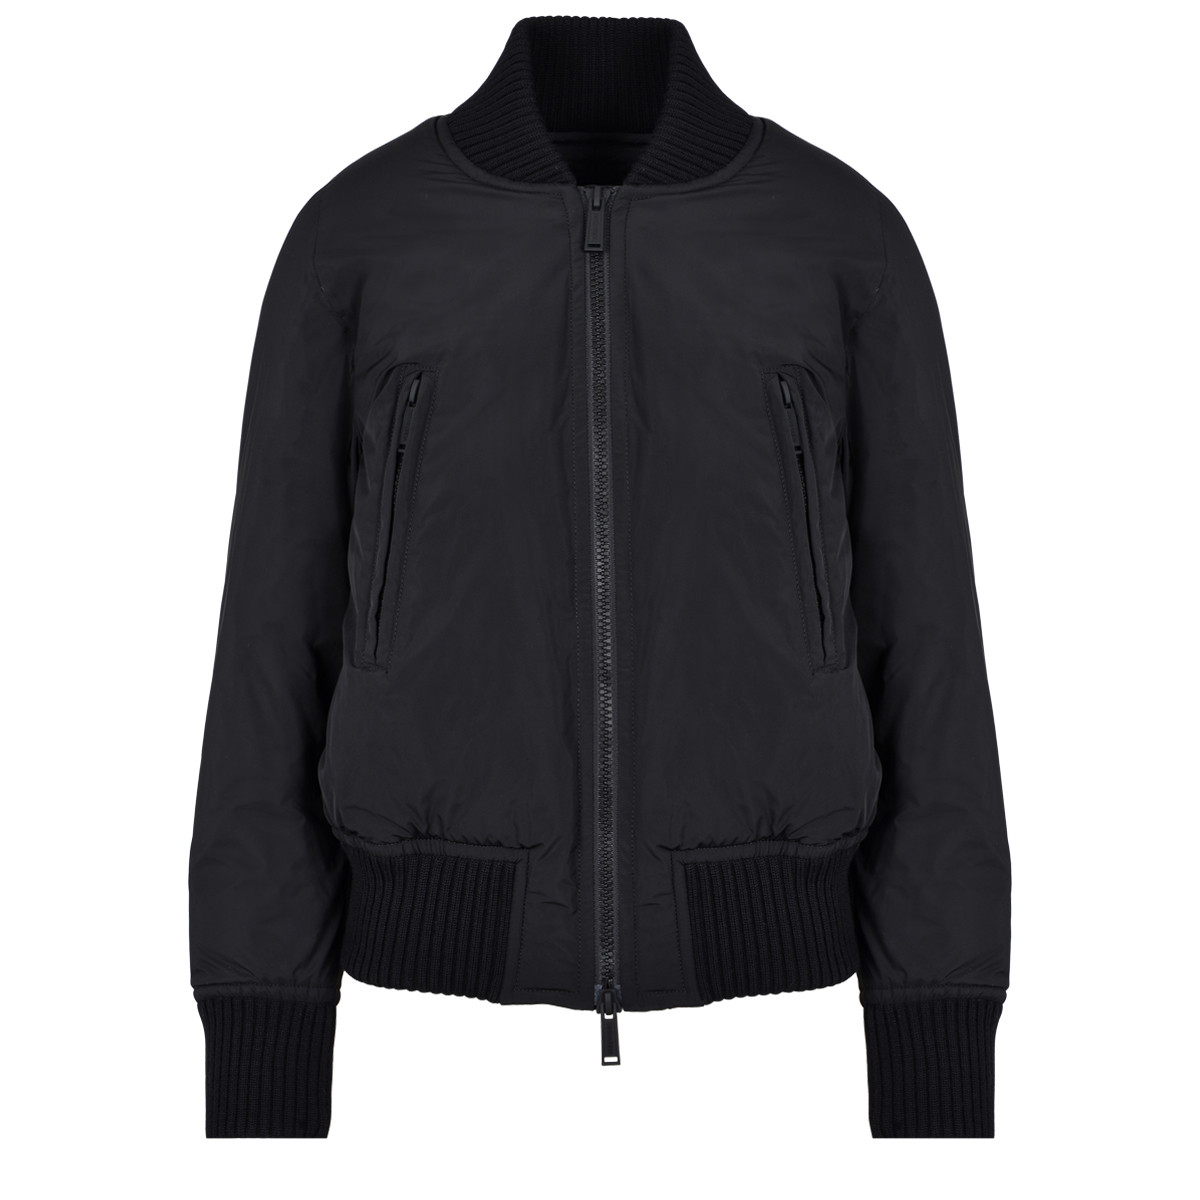 Black Icon Jacket at Vectorified.com | Collection of Black Icon Jacket ...